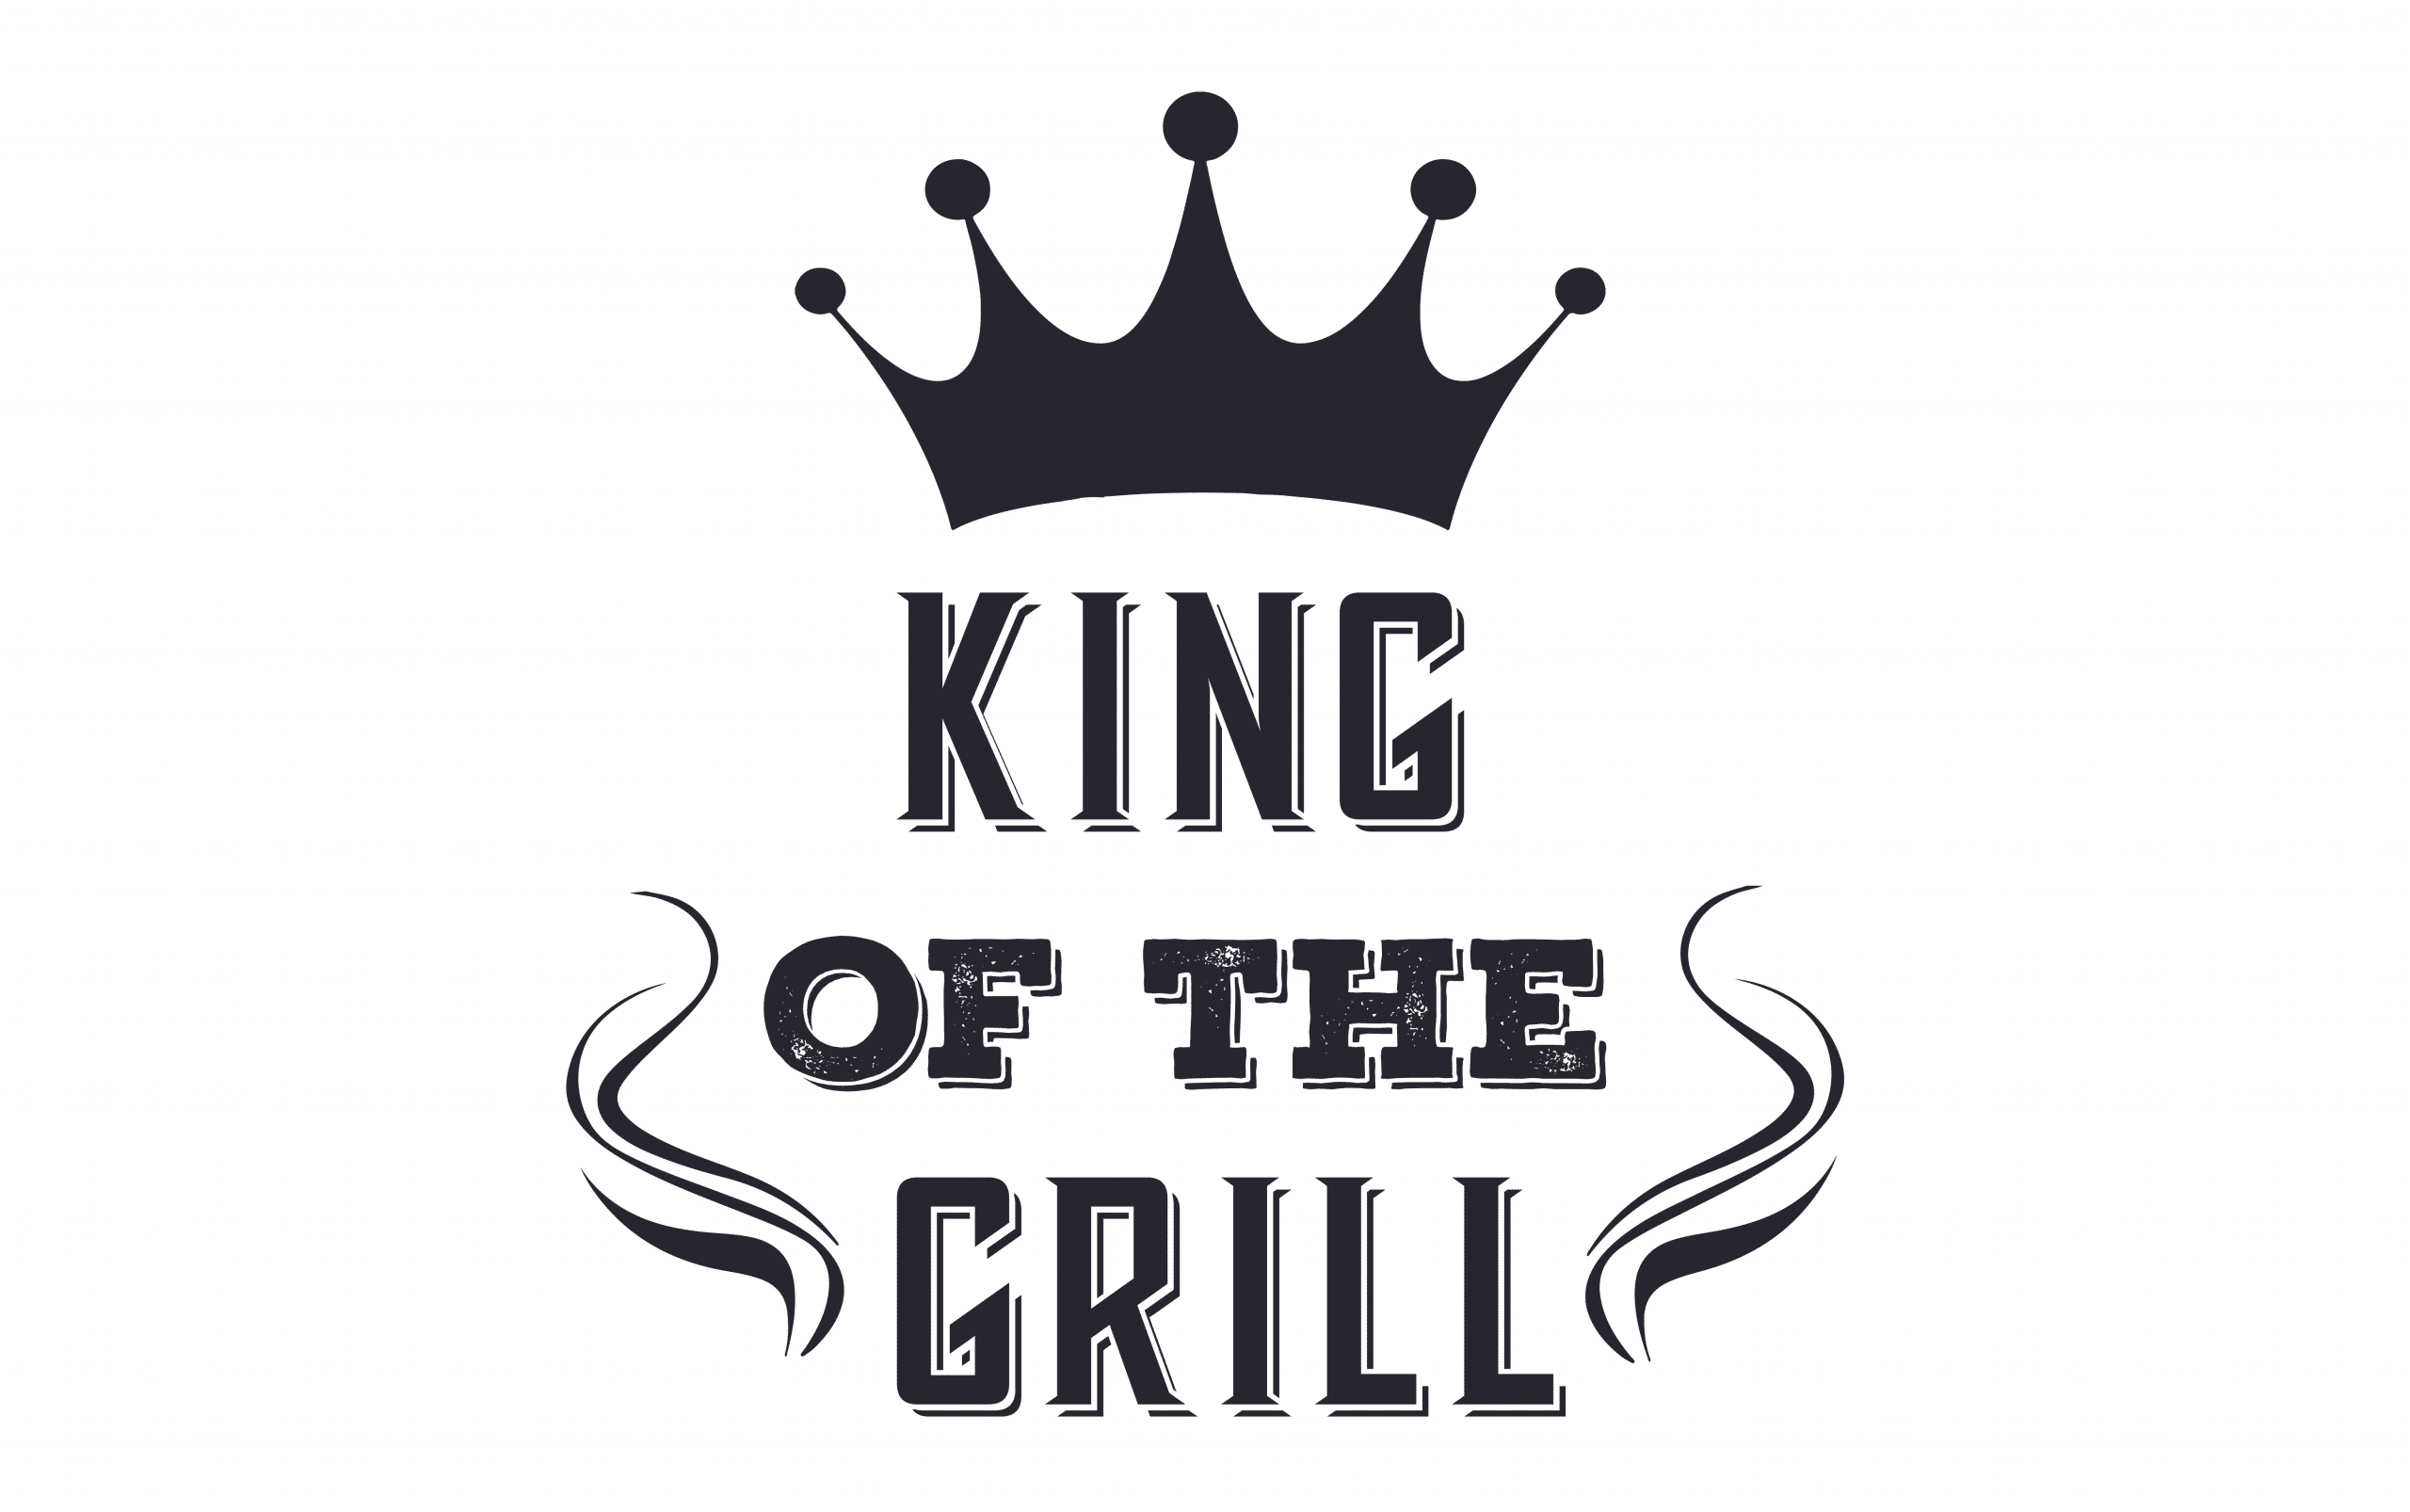 https://amazingribs.com/wp-content/uploads/2020/10/king_of_the_grill-e1623685847456.png